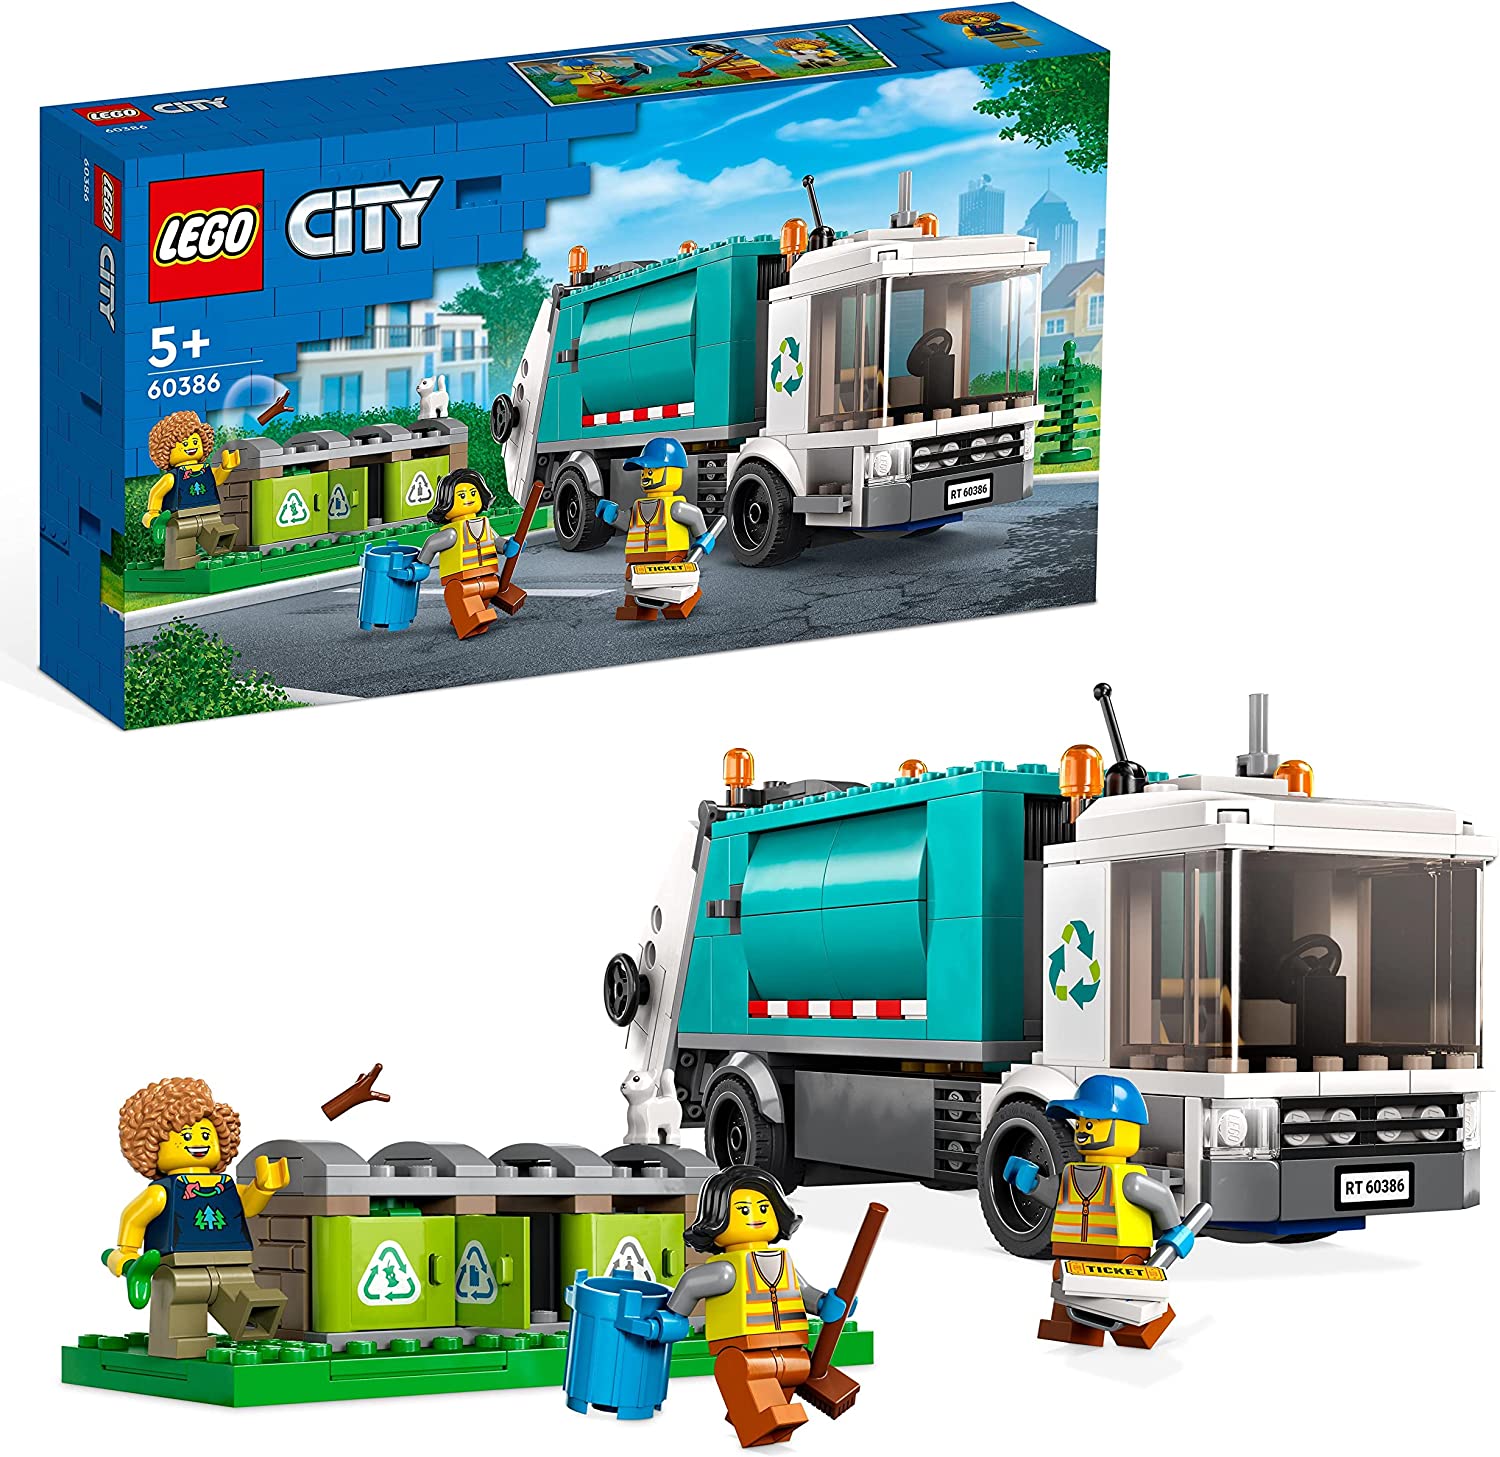 LEGO 60386 City Rubbish Collection, Rubbish Truck Toy with Wheelie Bins for Children from 5 Years, Educational and Sorting Toy, Sustainable Life Series